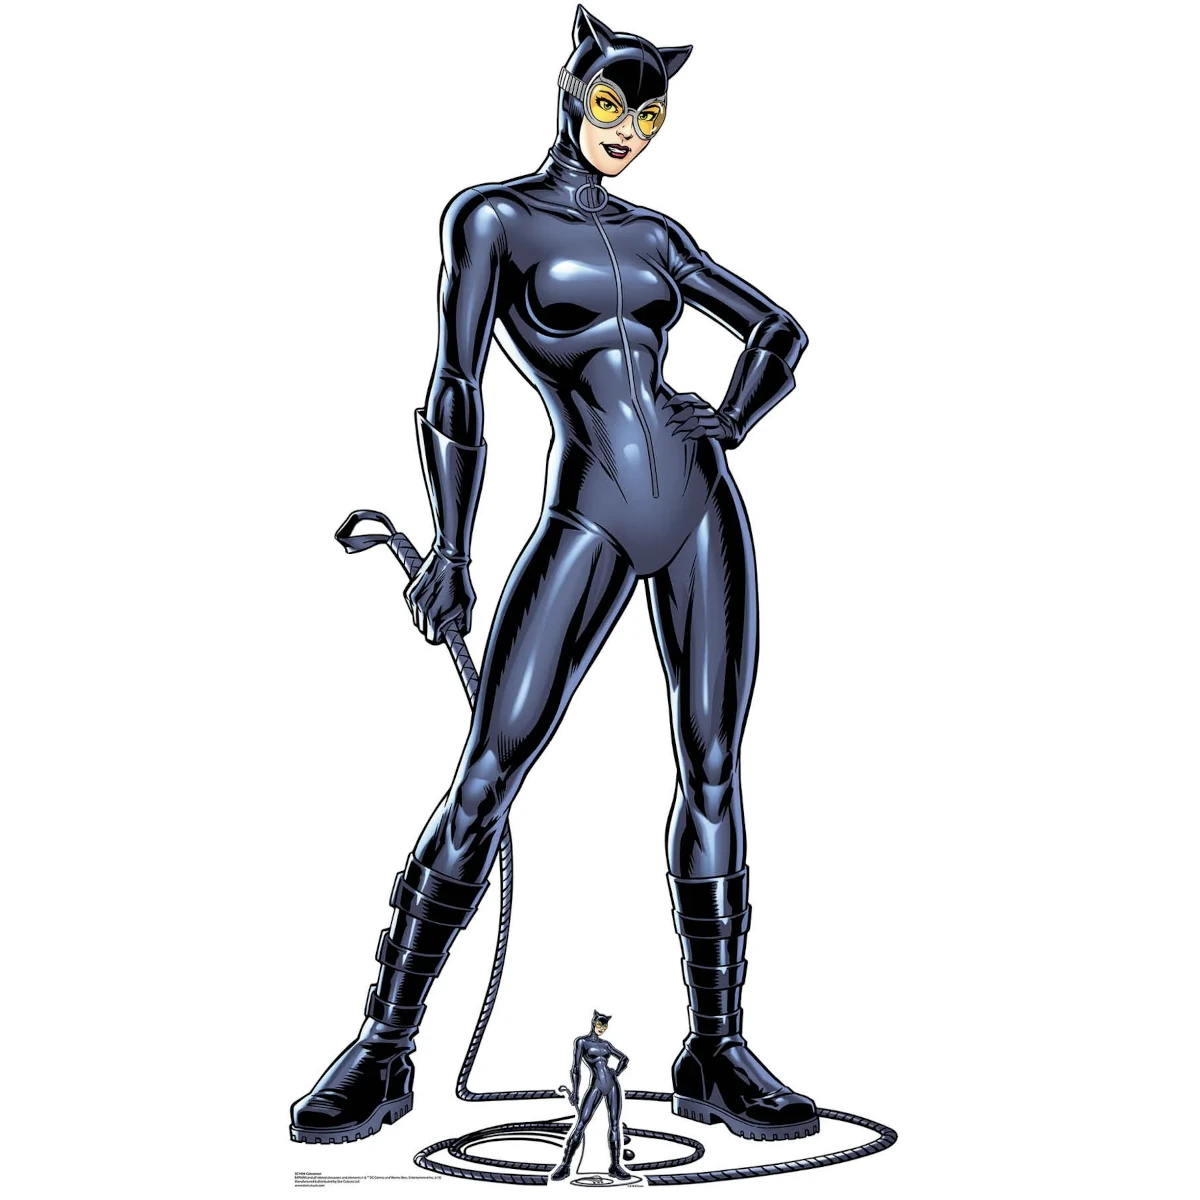 SC1456 Catwoman with Whip (DC Comics) Official Lifesize + Mini Cardboard Cutout Standee Front